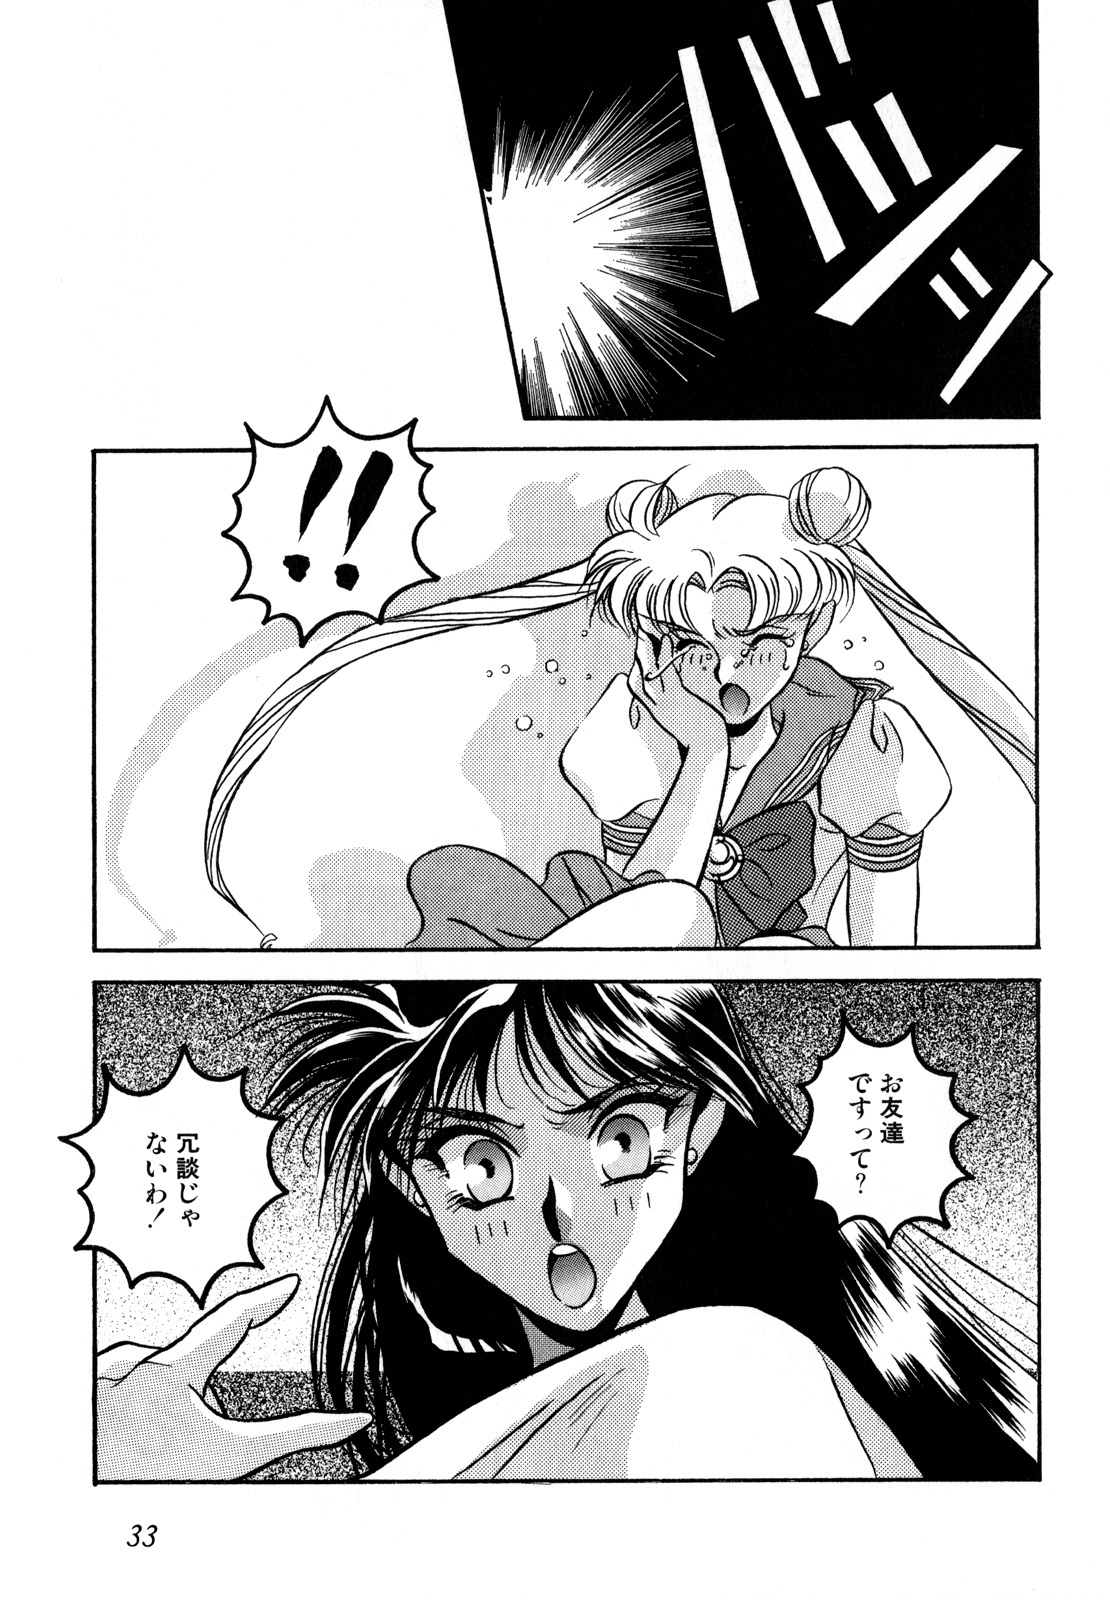 [Anthology] Lunatic Party 2 (Sailor Moon) page 34 full